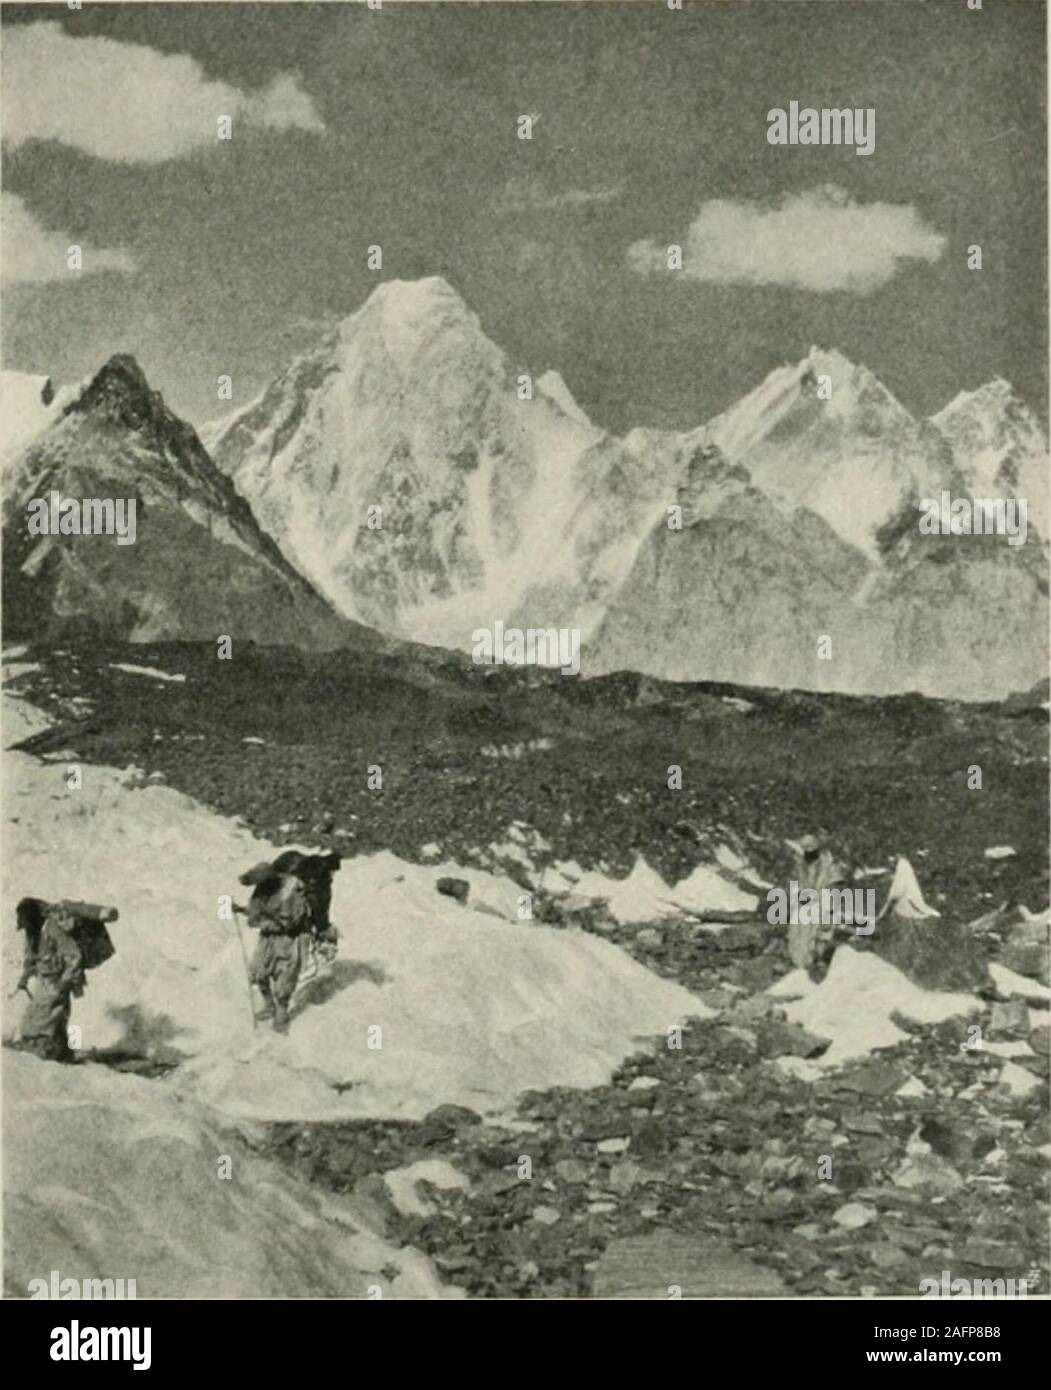 . Karakoram and western Himalaya 1909, an account of the expedition of H. R. H. Prince Luigi Amadeo of Savoy, duke of the Abruzzi. From Rdokass to the Concordia Amphitheatre. 21:3 down in great icefalls from precipices loaded with snow. Then comesMitre Peak, a colossal, strangely-shaped crag, which terminates theleft wall of the valley. In front of us, apparently quite close at hand,the transversal chain of the Gasherbrum seeias to shut in the valley.It is a file of peaks and snow crests, stretching on both sides of theprecipitous rock wall of the Gasherbrum itsolf, all ridges and ice guUies,. Stock Photo